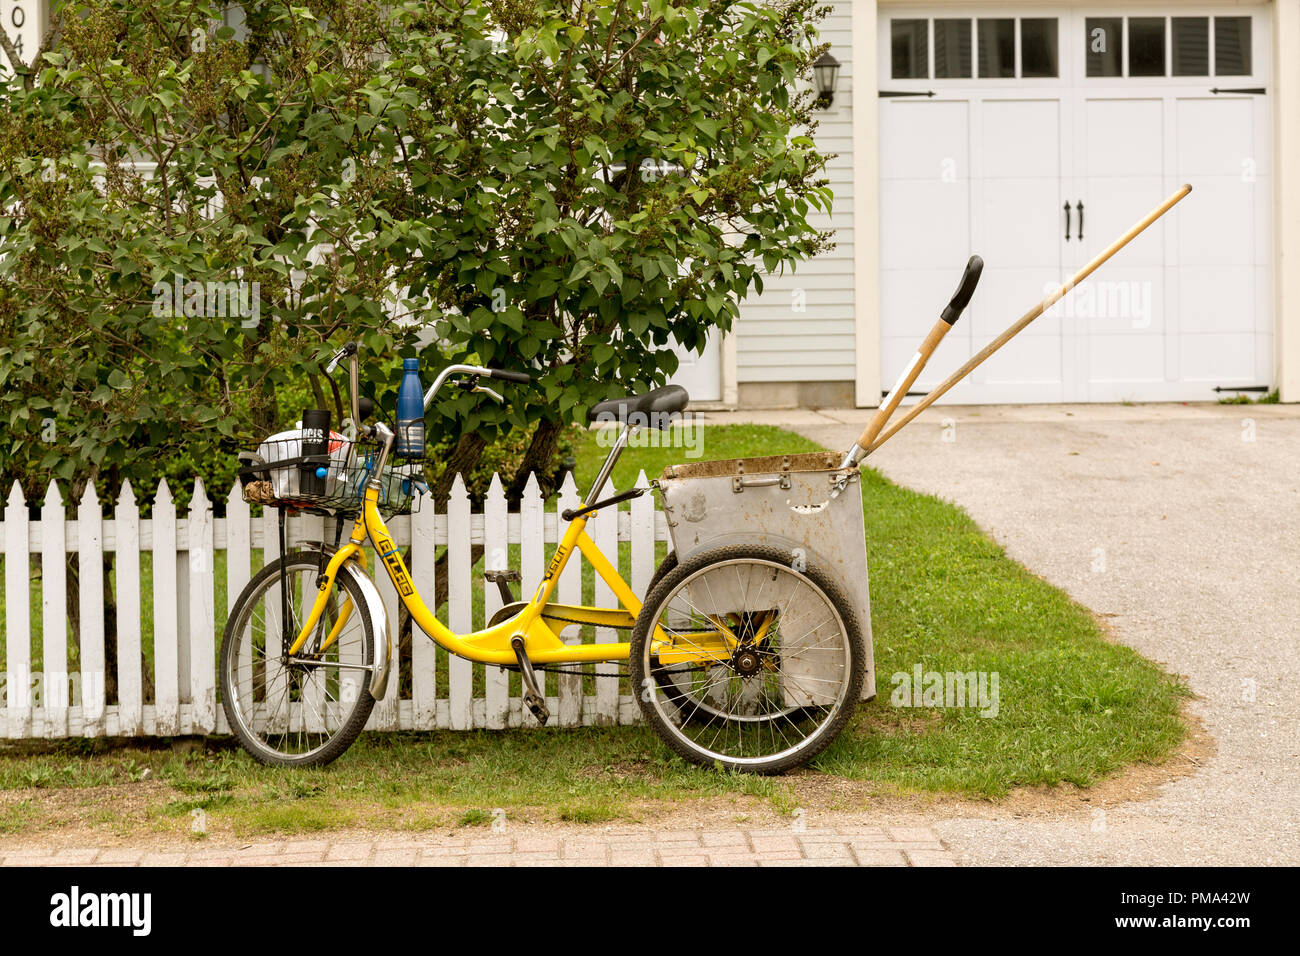 Bicycle adapted to carry garden tools, on Mackinac Island, Michigan where no motor vehicles are allowed. ilocated in the Midwest, United States. Stock Photo